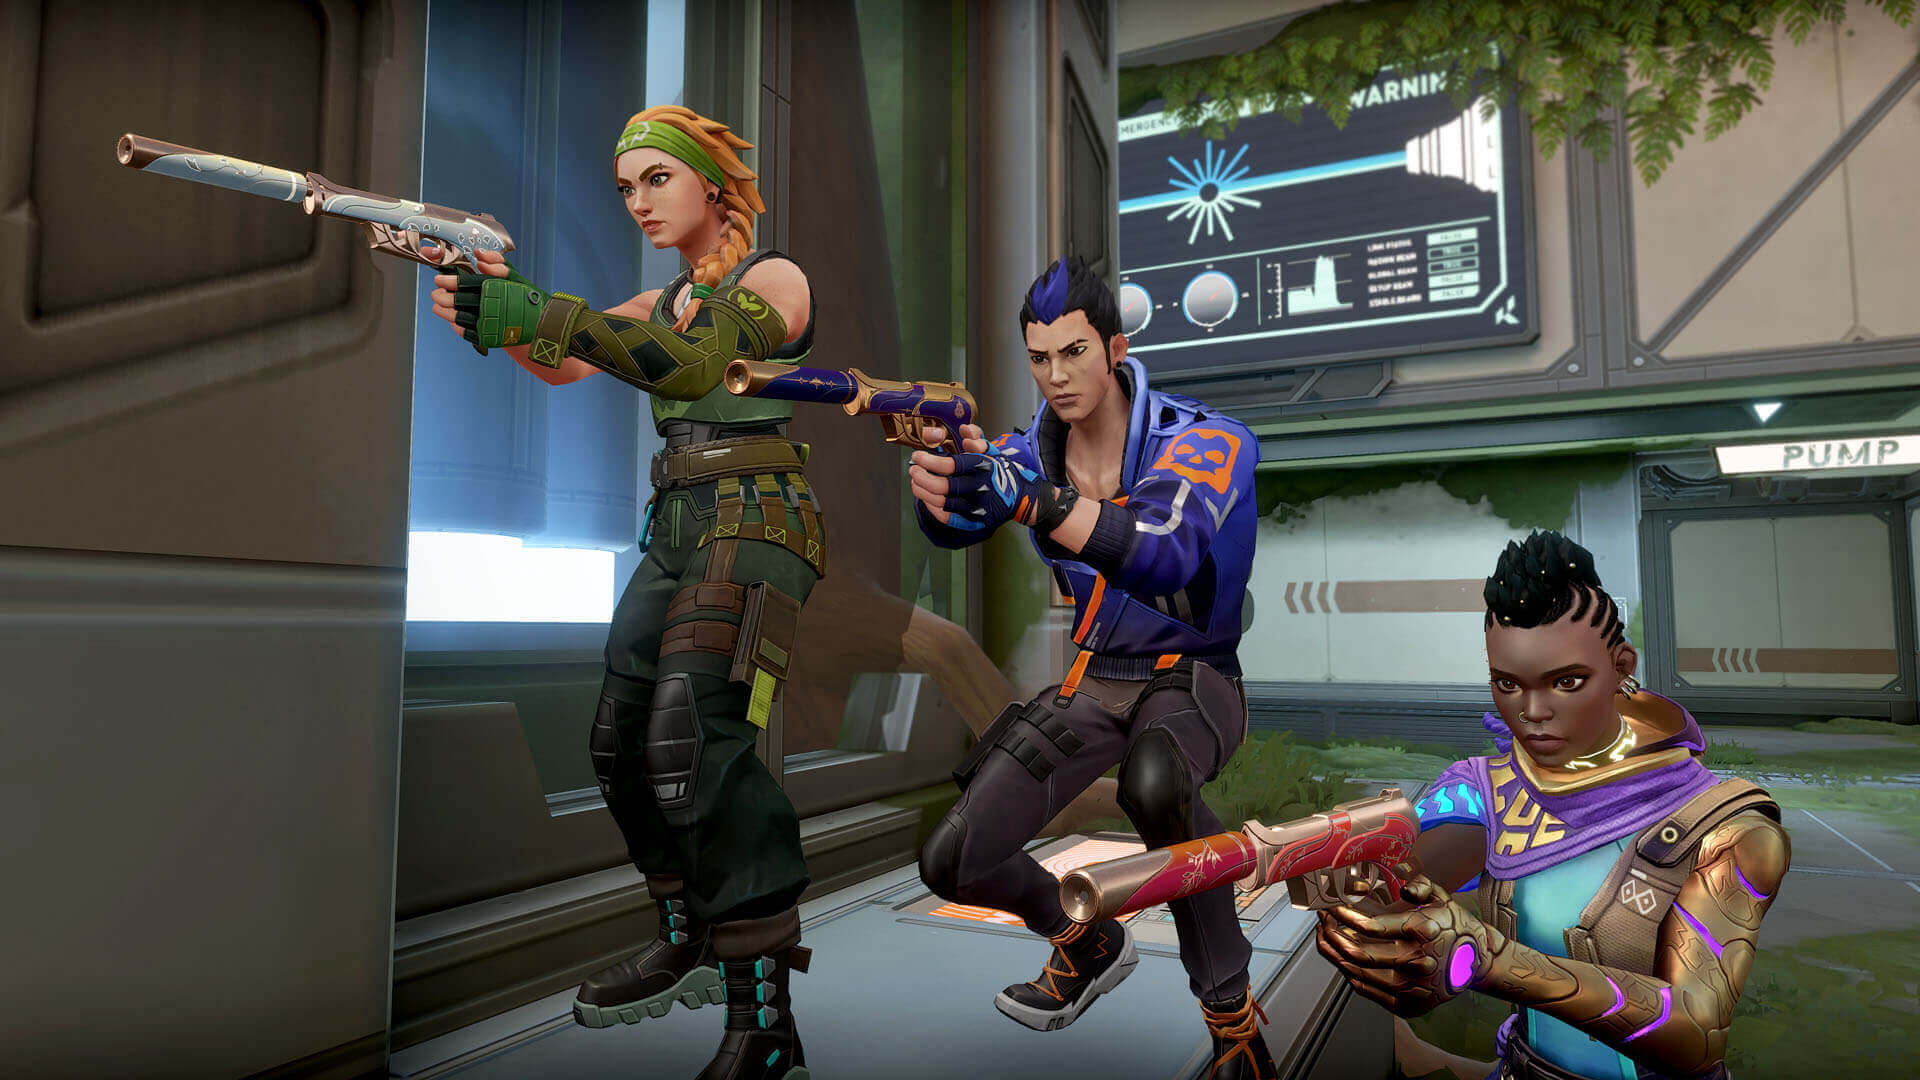 Three characters aiming pistols off-camera in Riot Games' Valorant